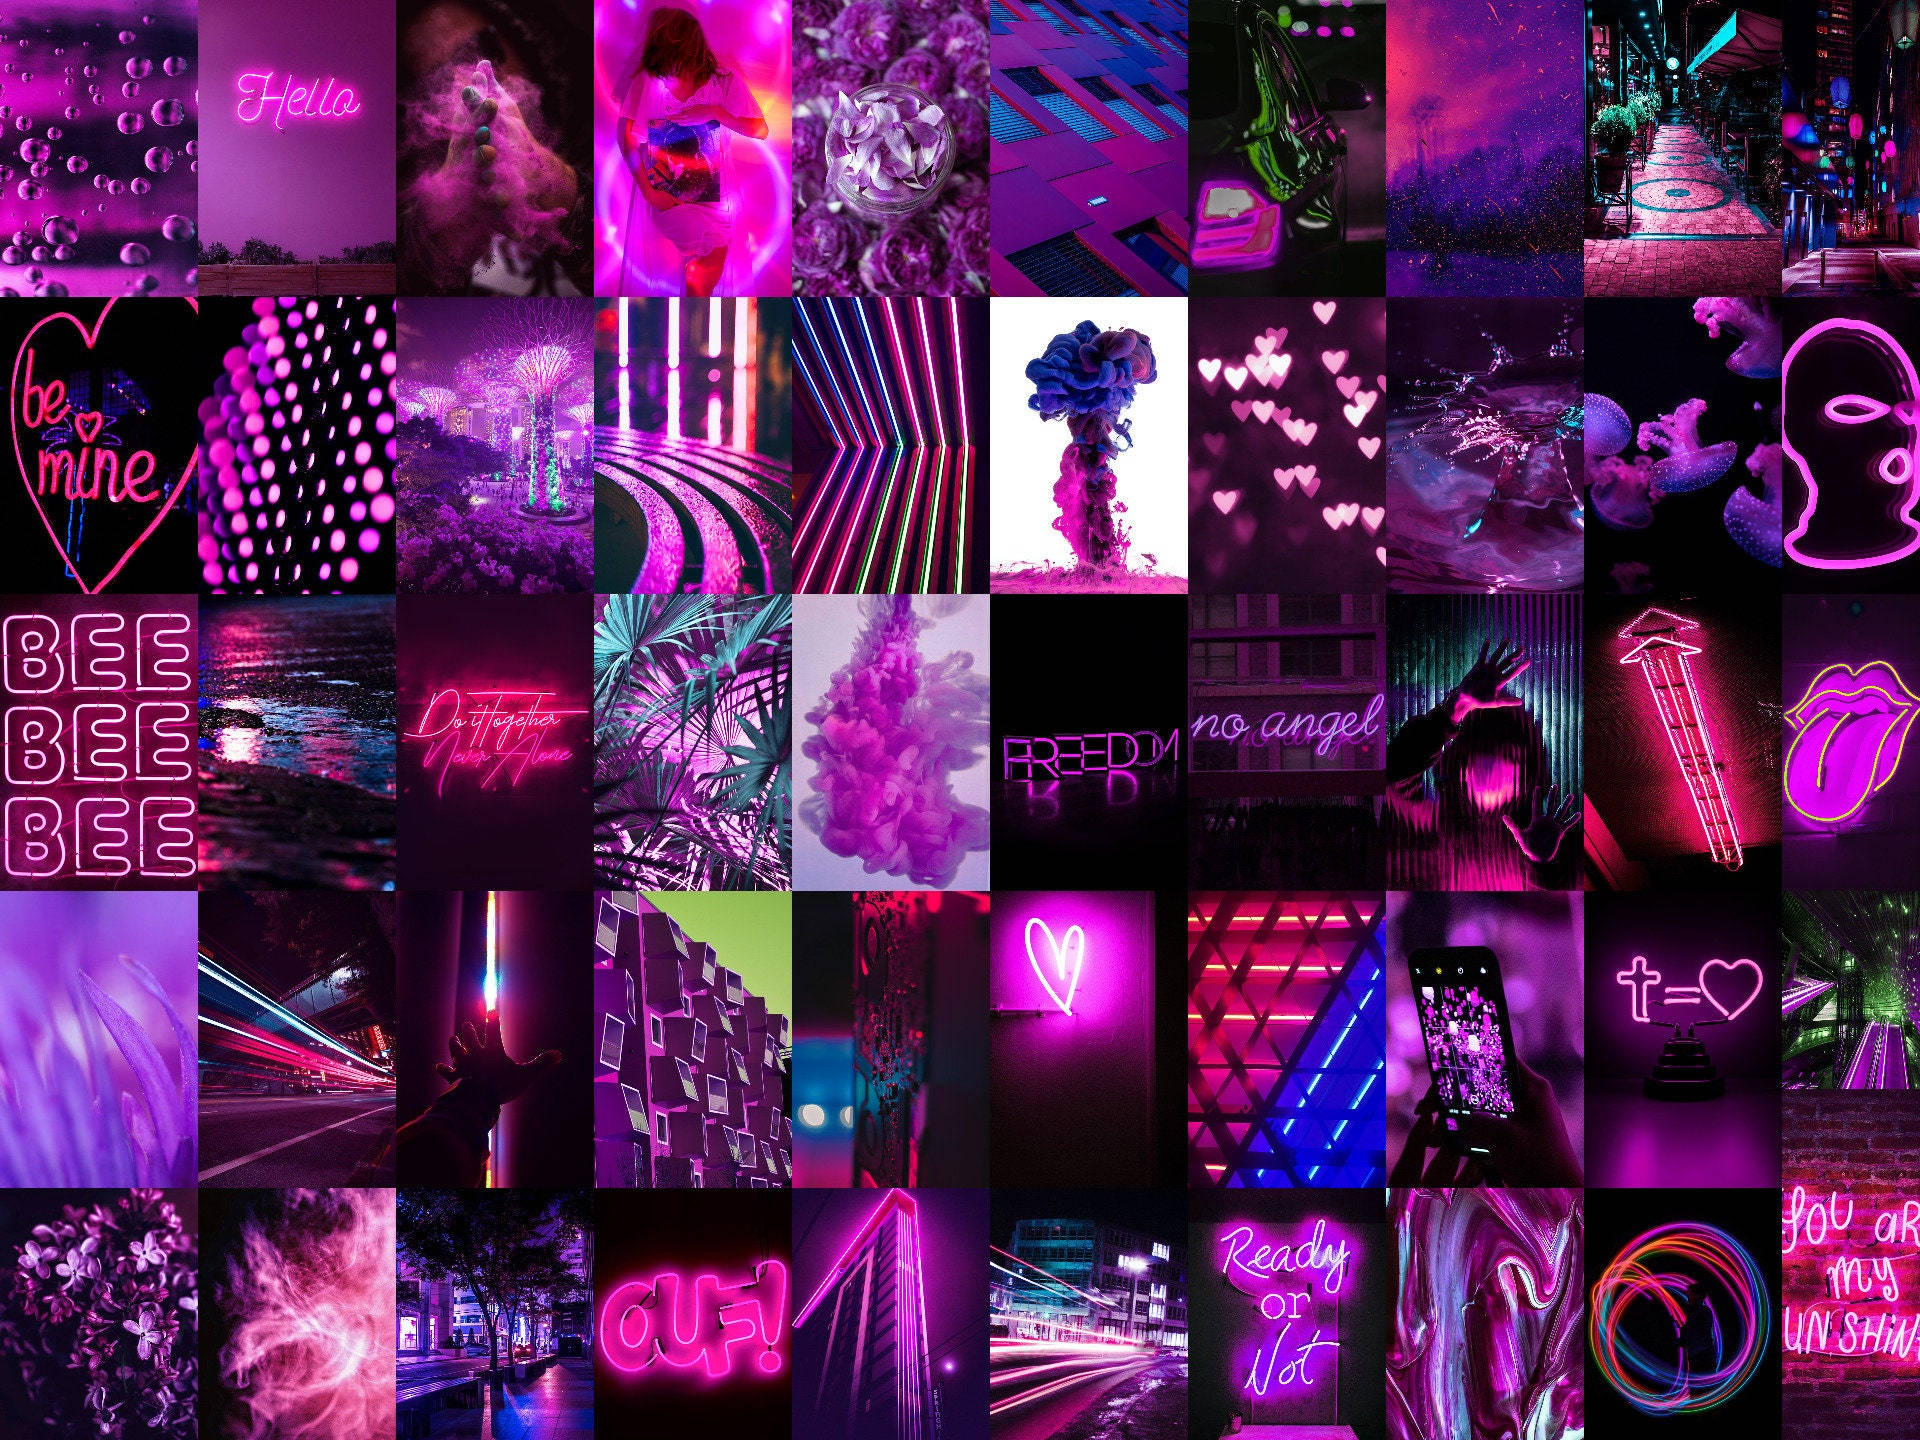 Free Neon Wallpaper Downloads, [700+] Neon Wallpapers for FREE | Wallpapers .com